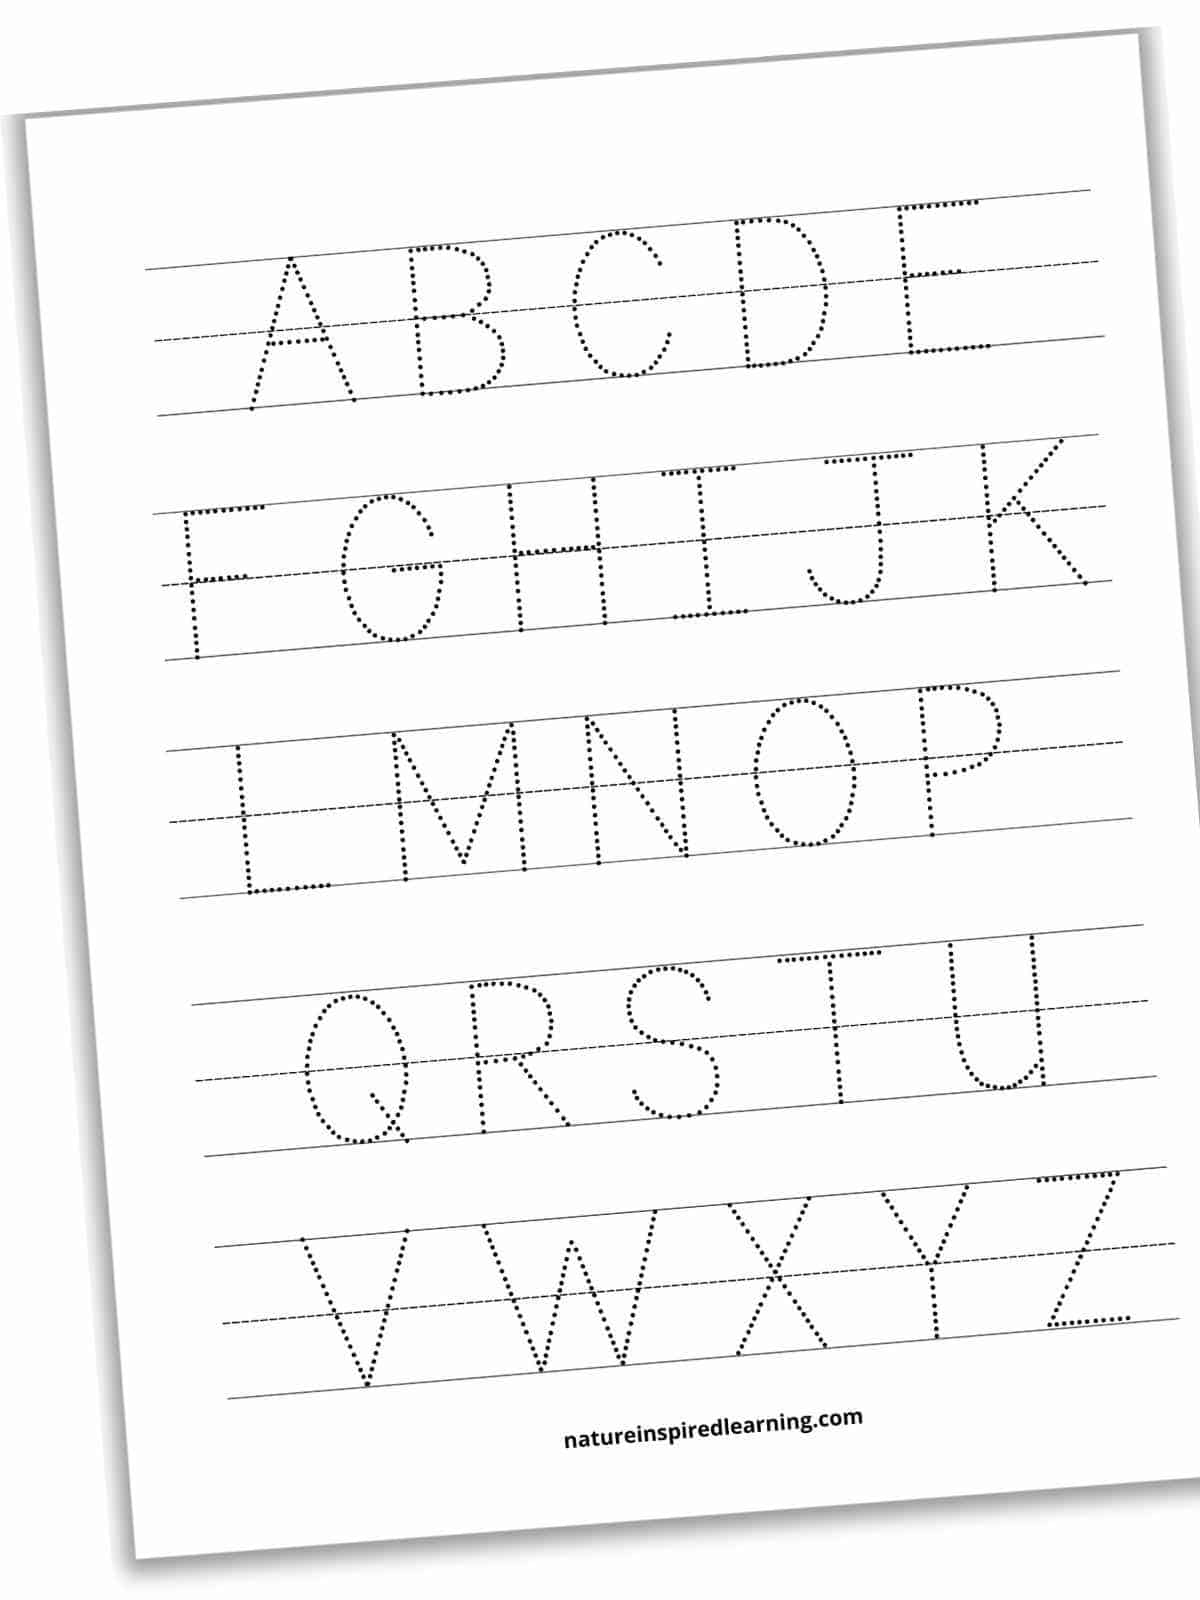 worksheet with five sets of lines with capital letters A through Z in a dot font on the lines